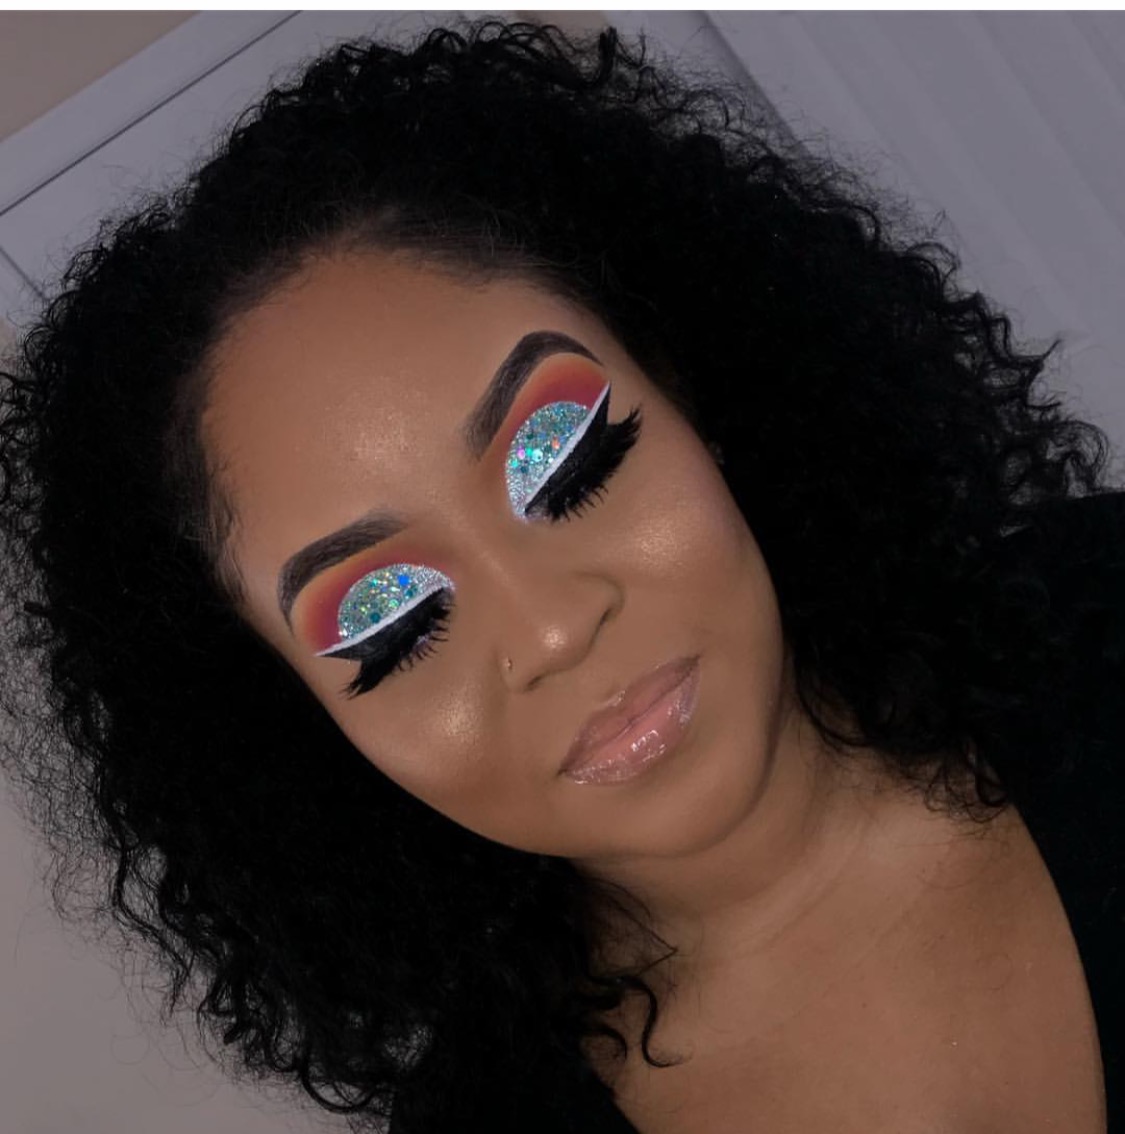 will go crazy these glitter makeup looks - Slaylebrity